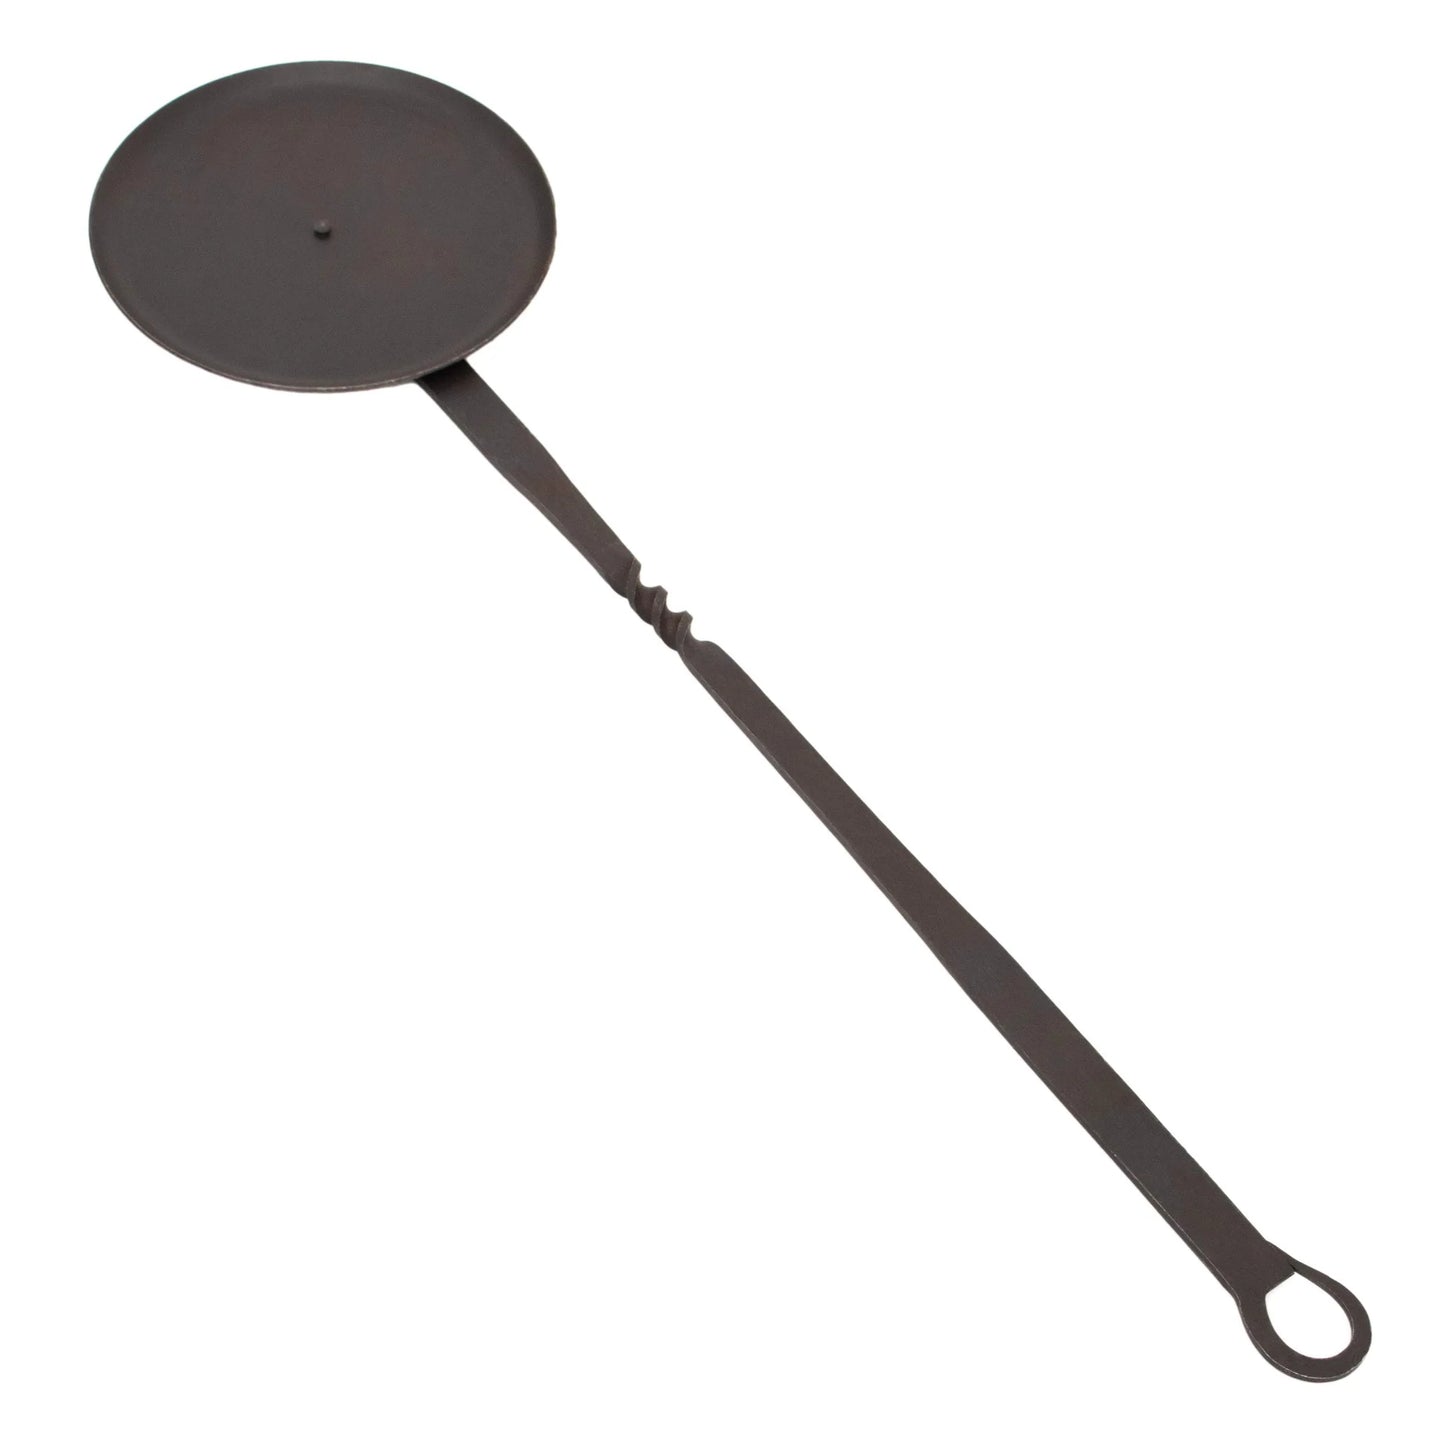 Medieval Hand Forged Cooking Pan With Long Handle for Fire Pit